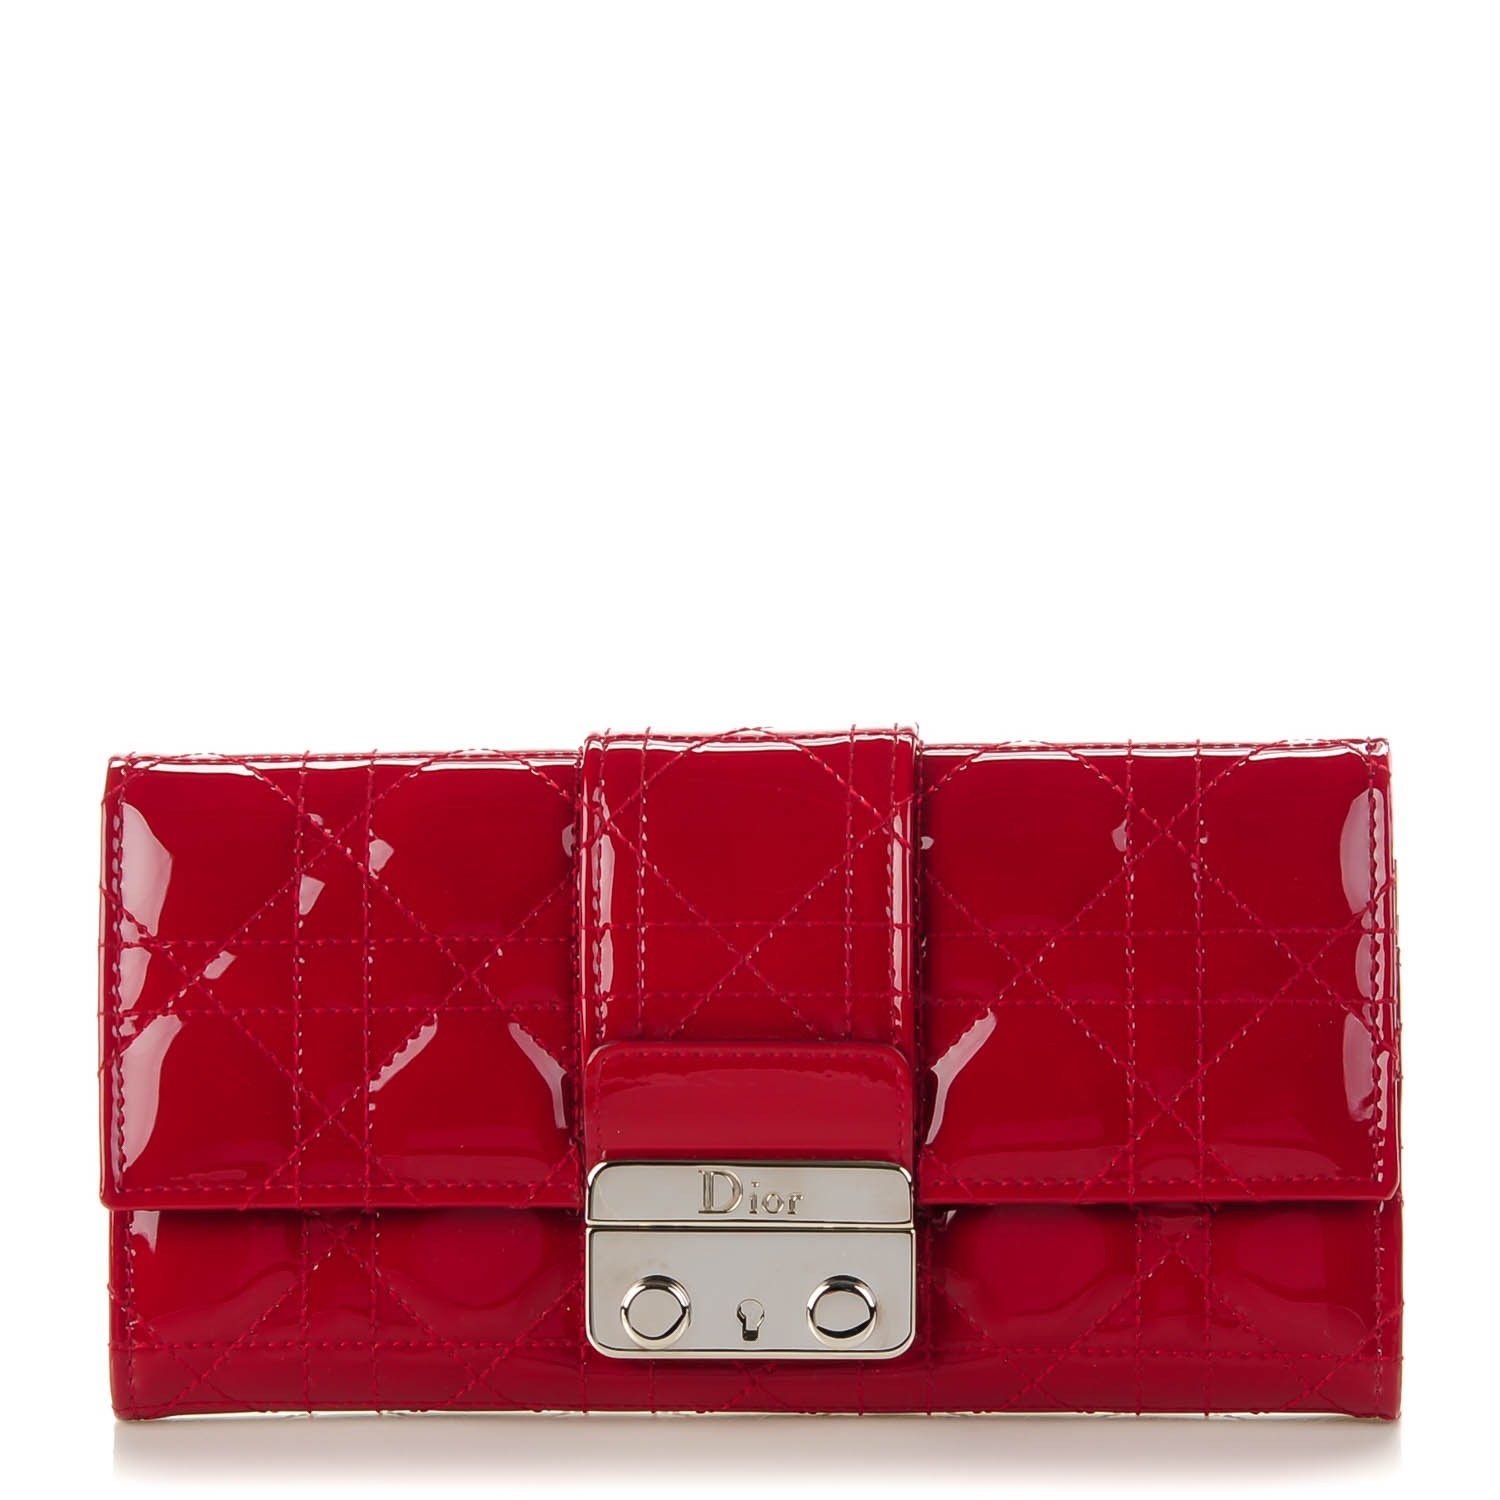 CHRISTIAN DIOR Patent Cannage Chain Wallet Red 136711